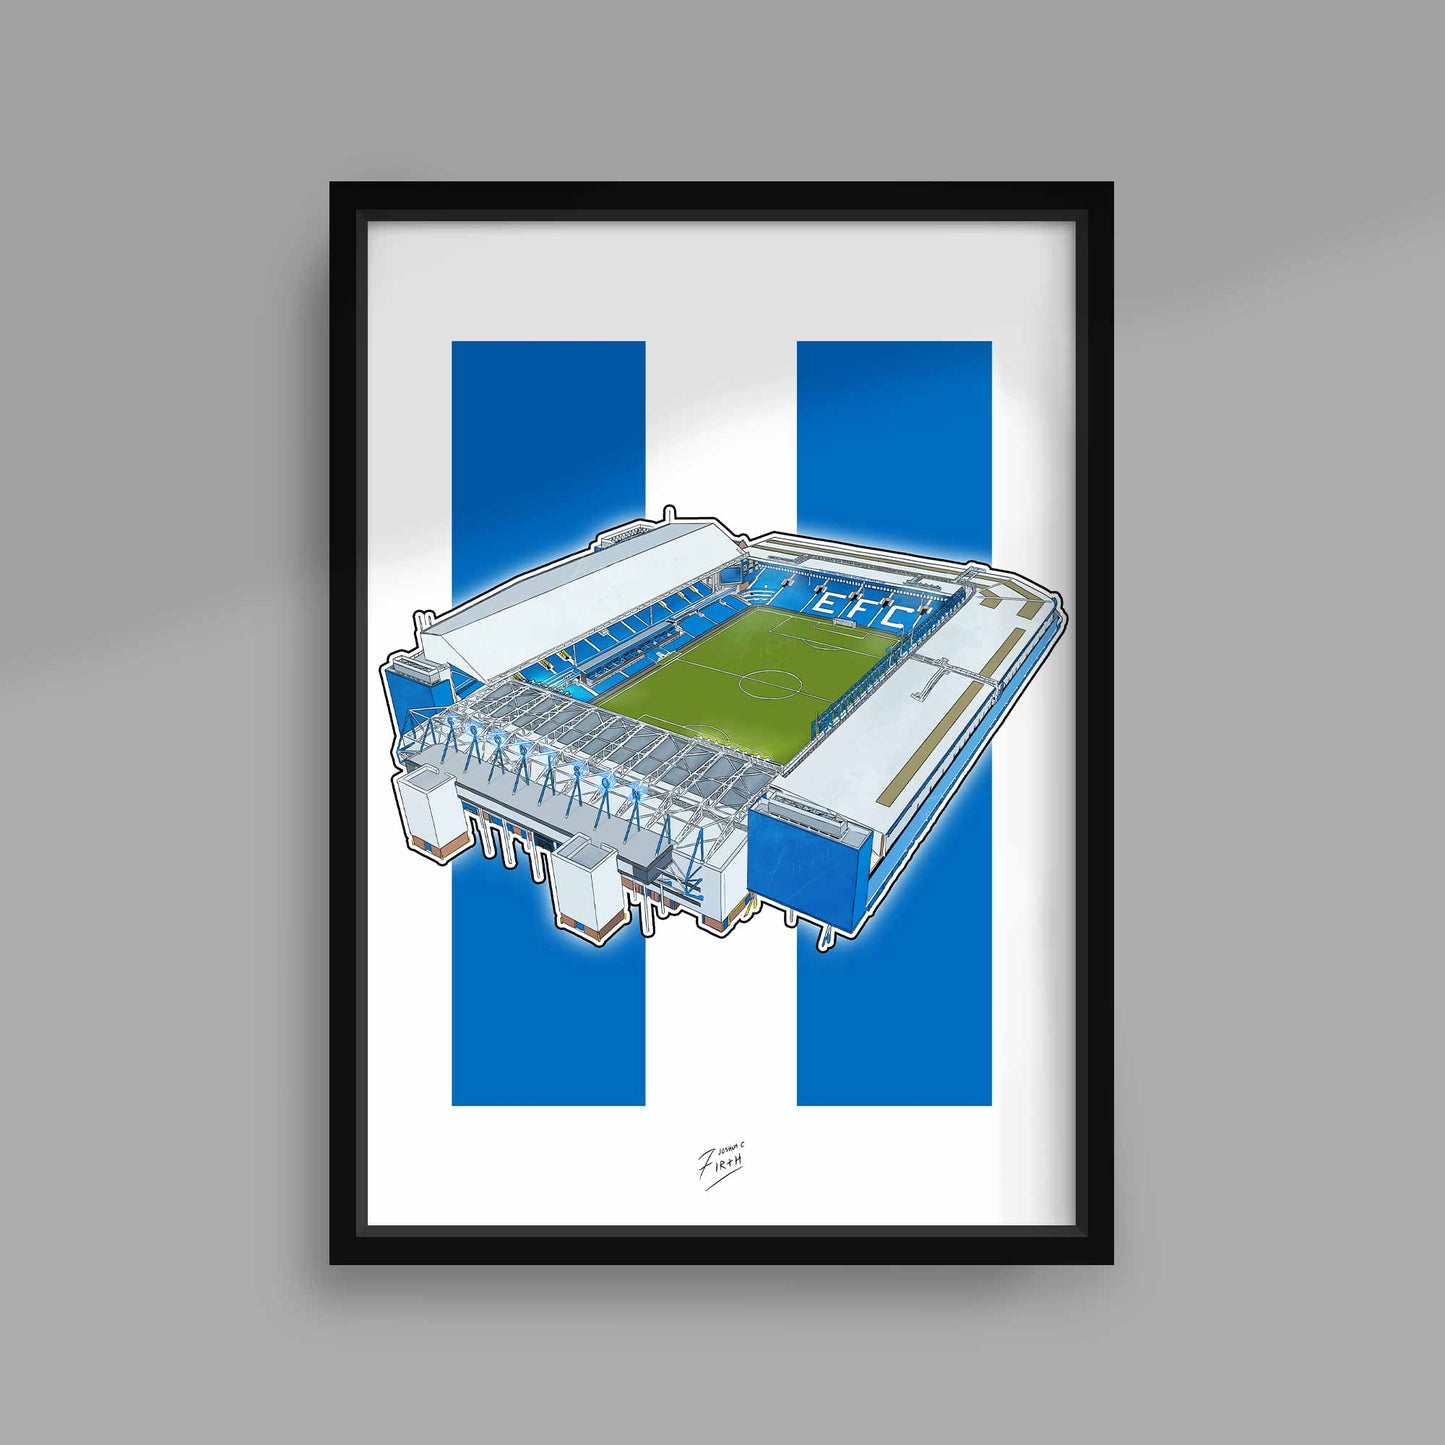 Everton themed poster inspired by the home of the Blues in Merseyside, Goodison Park